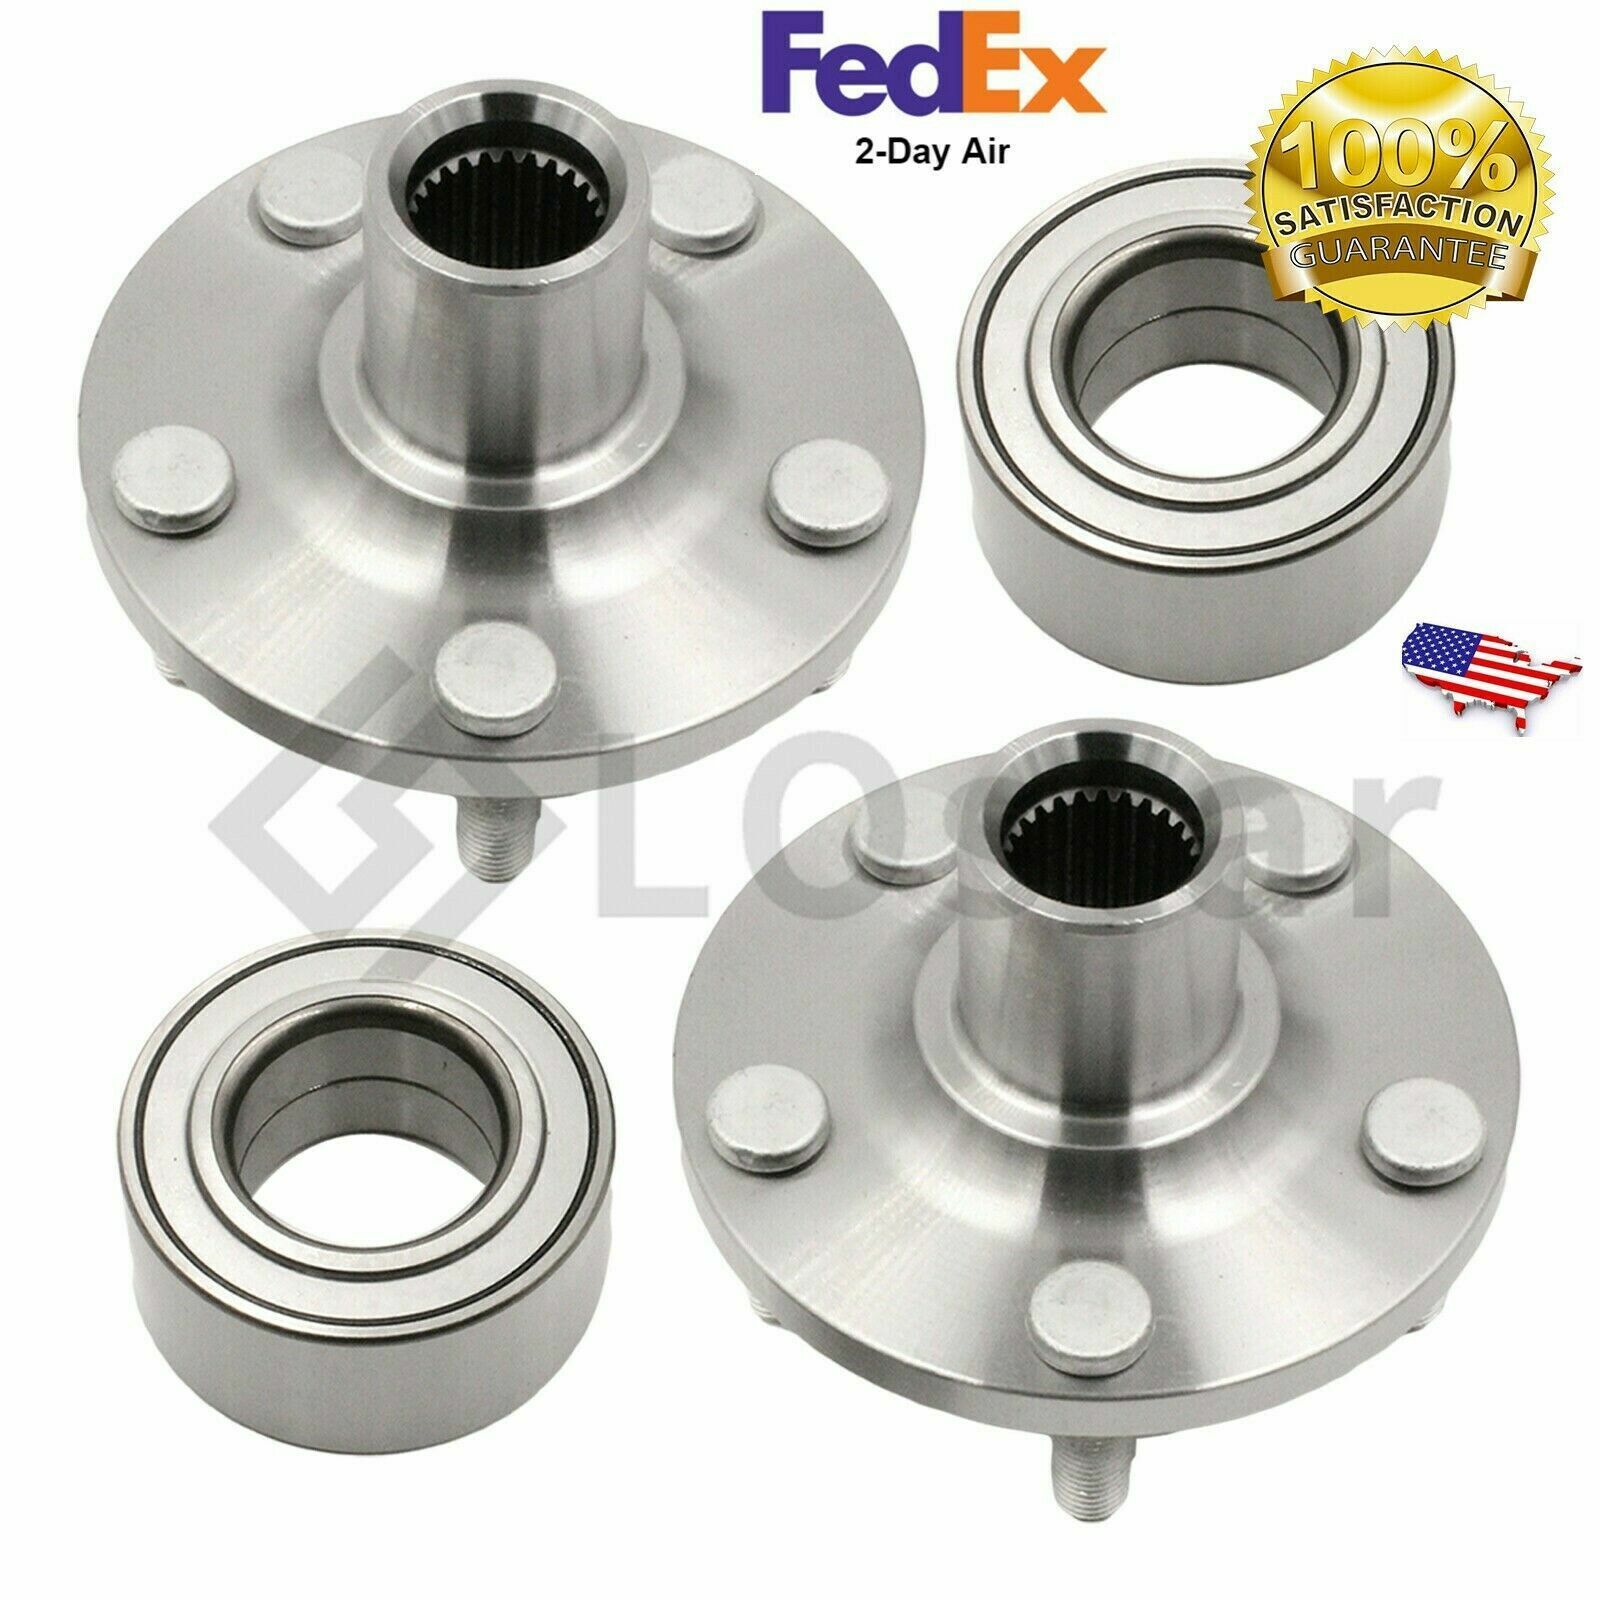 Pair(2) Front Wheel Hub Bearing Assembly For 00-16 Toyota Corolla Matrix Celica